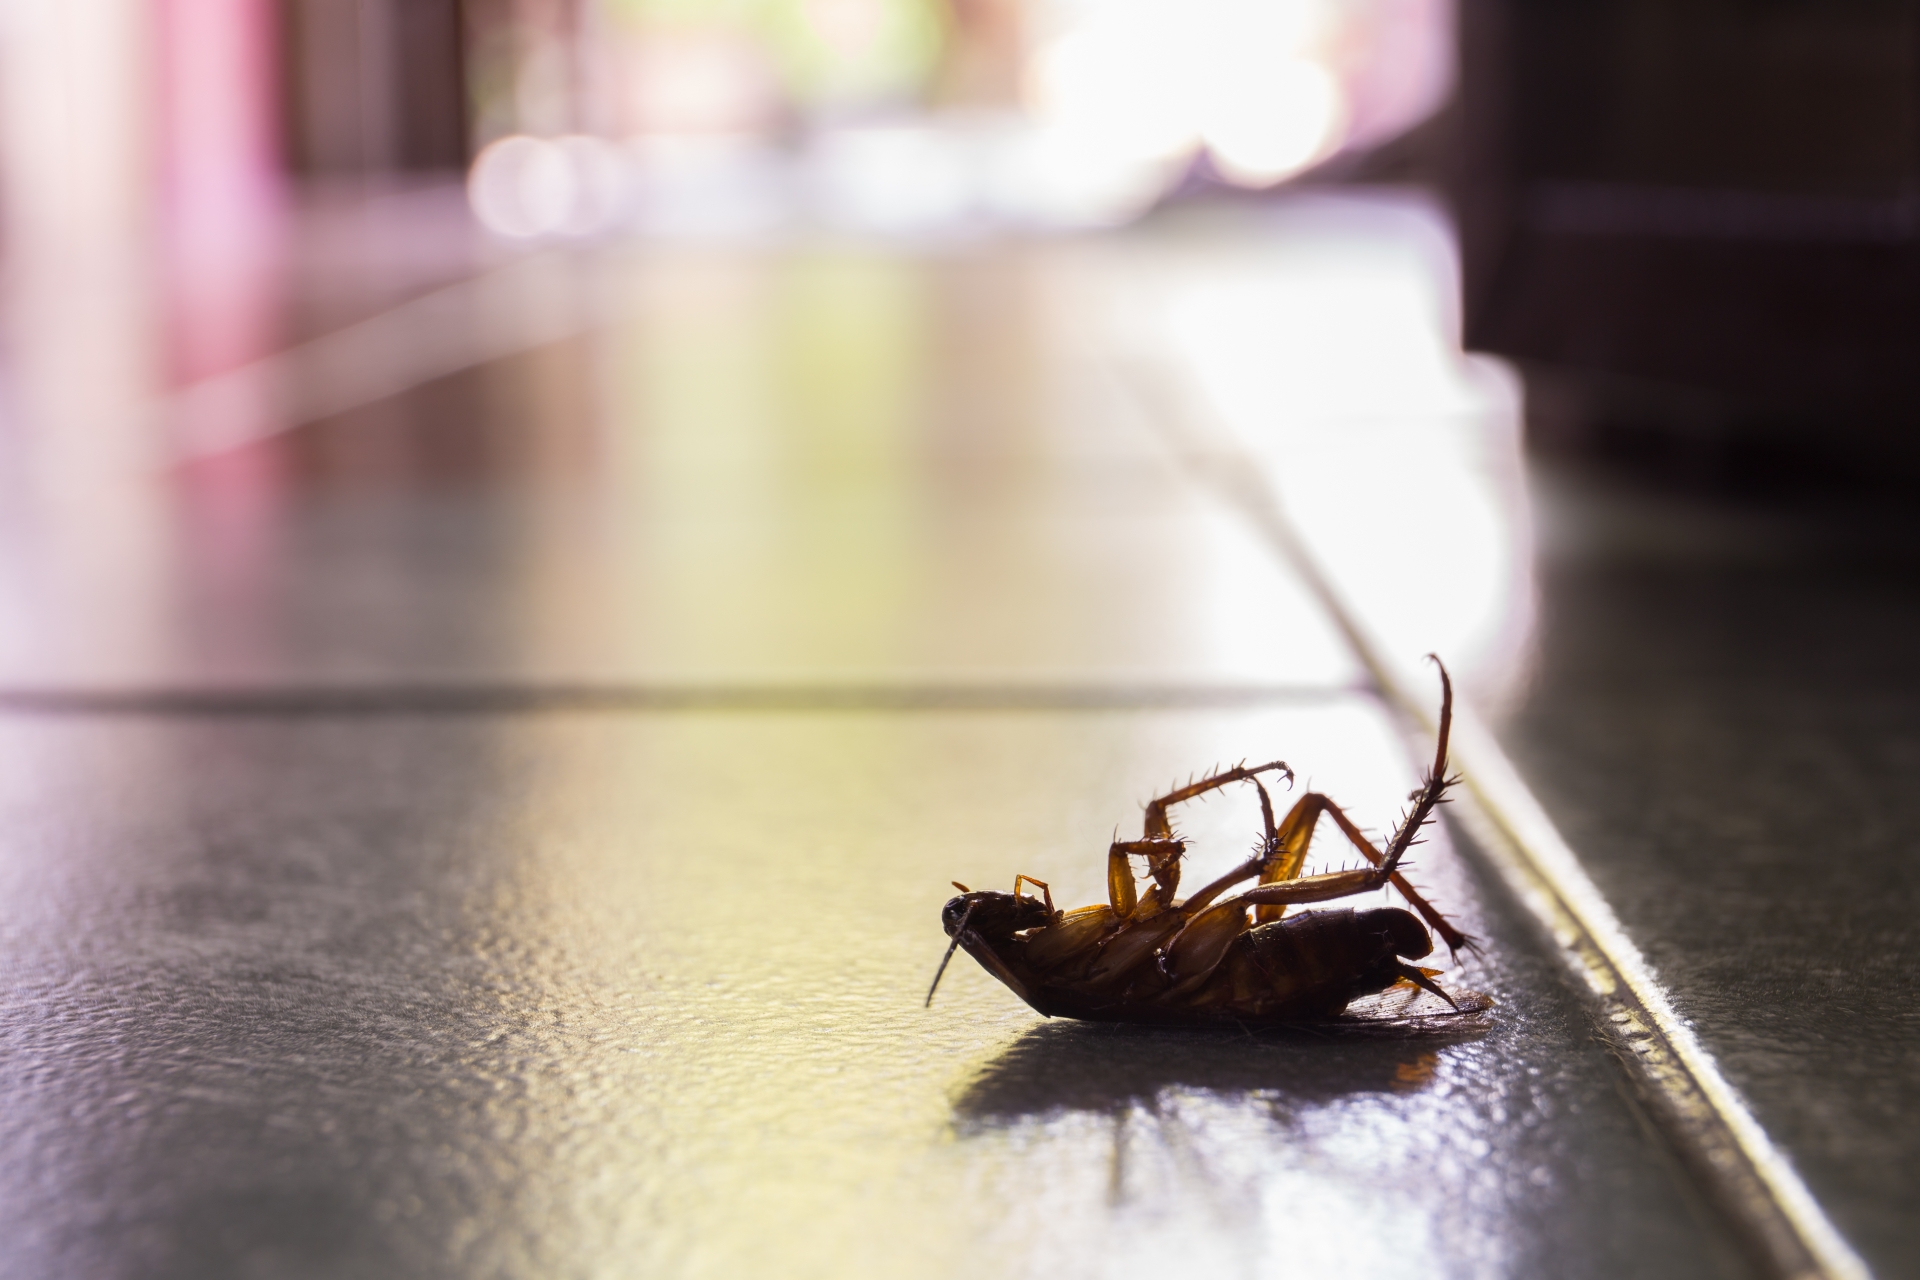 Cockroach Control, Pest Control in West Watford, Holywell, WD18. Call Now 020 8166 9746